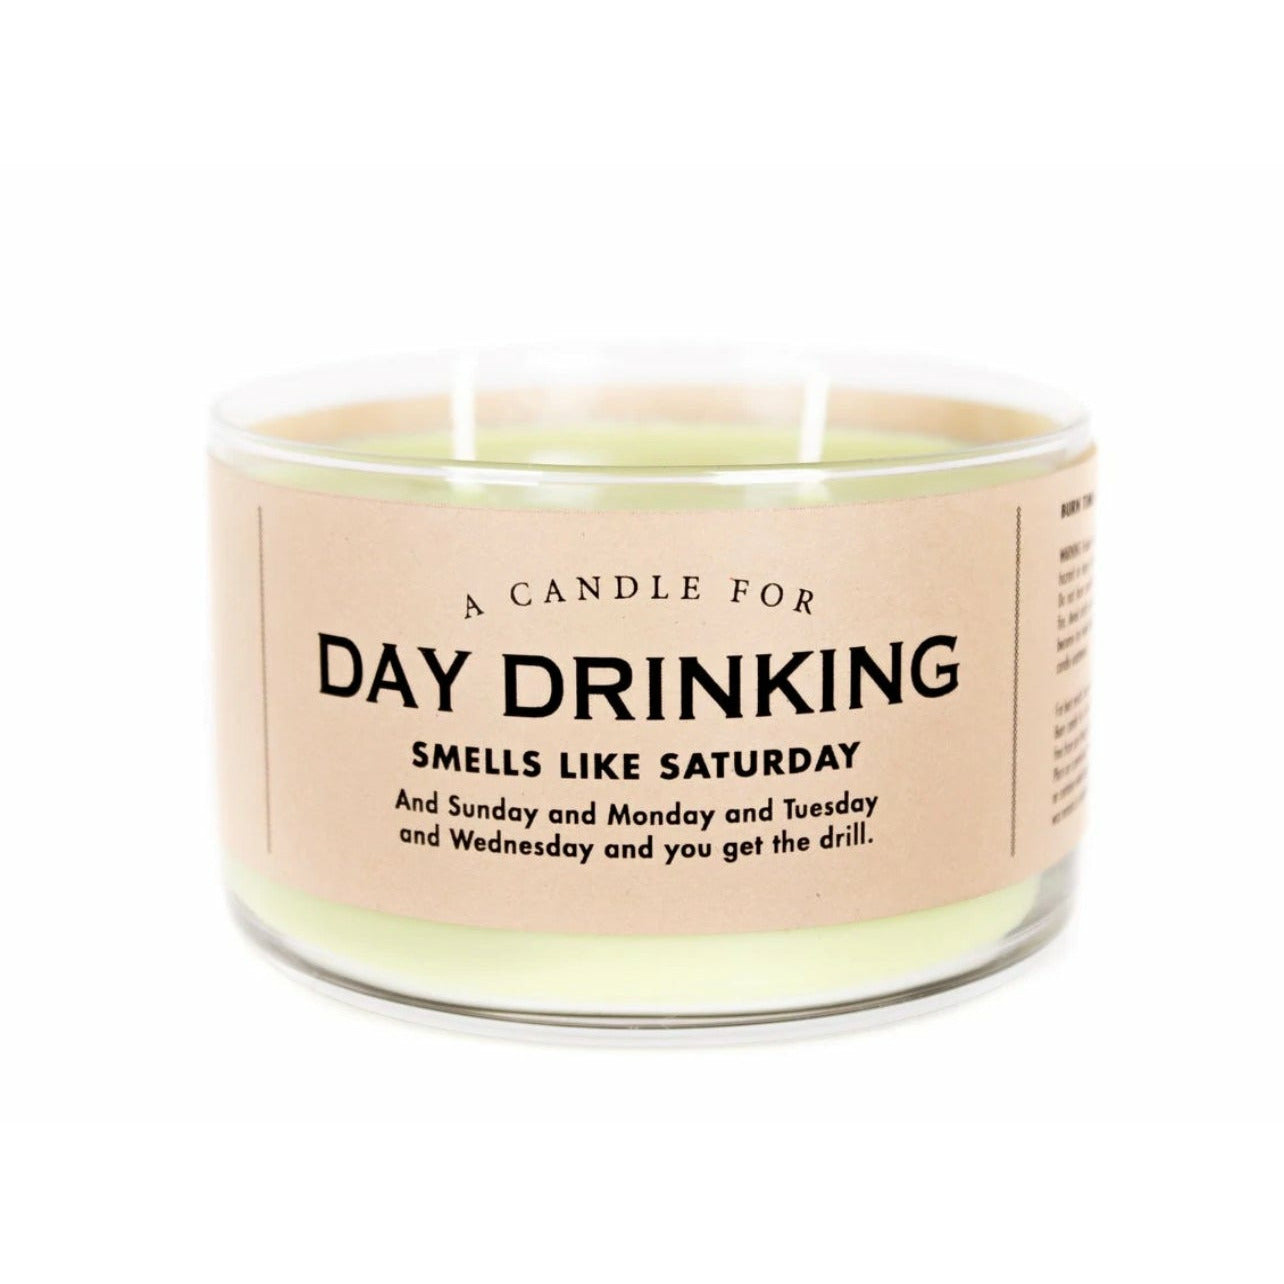 Day Drinking Candle